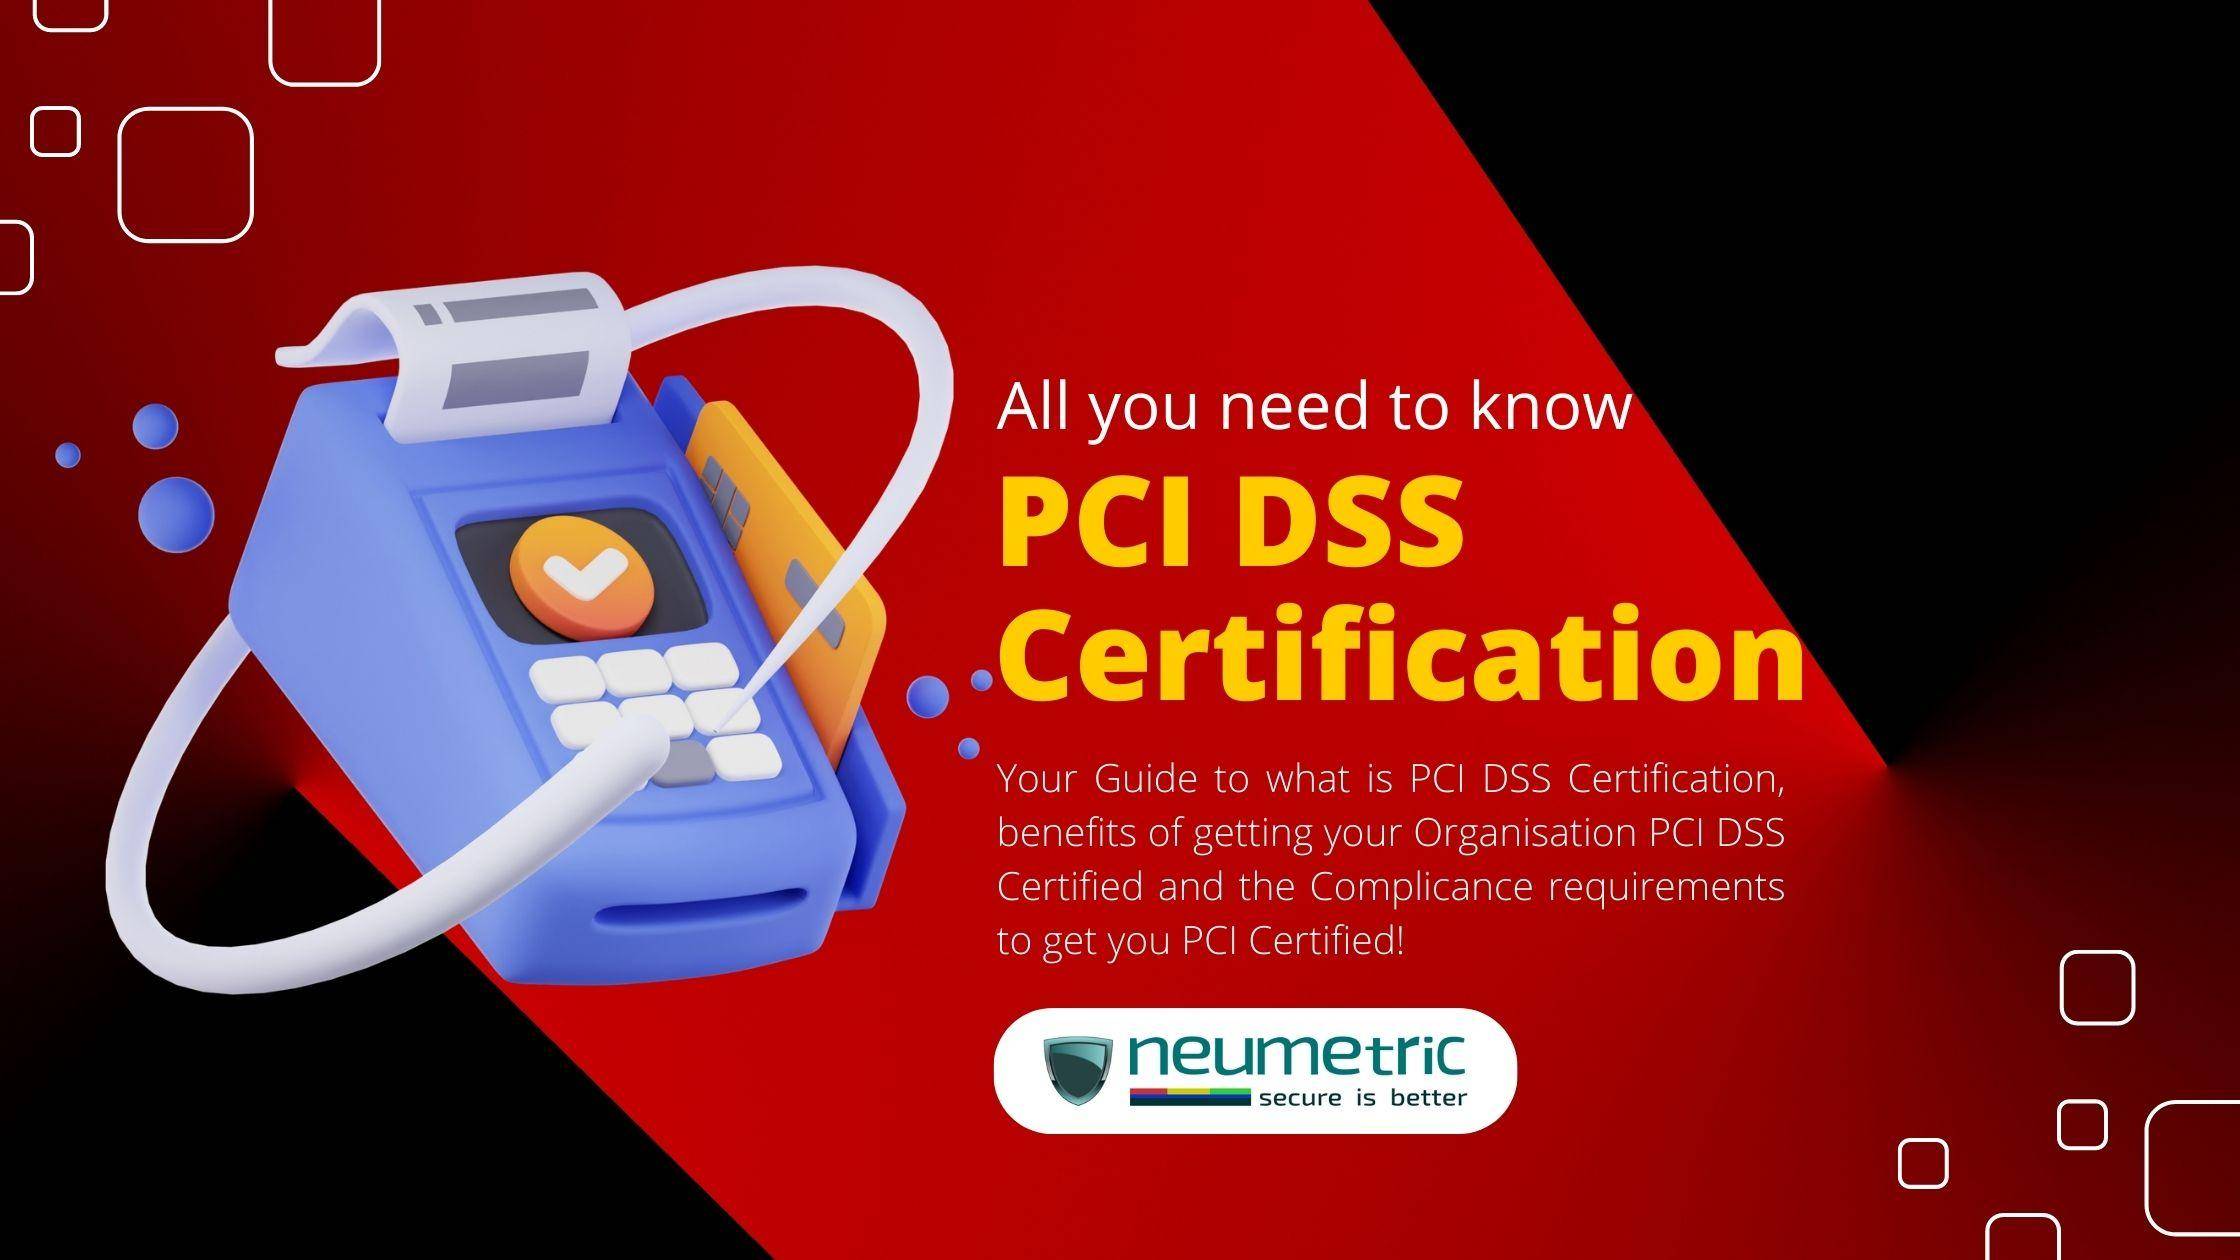 PCI DSS Certification – All you need to know